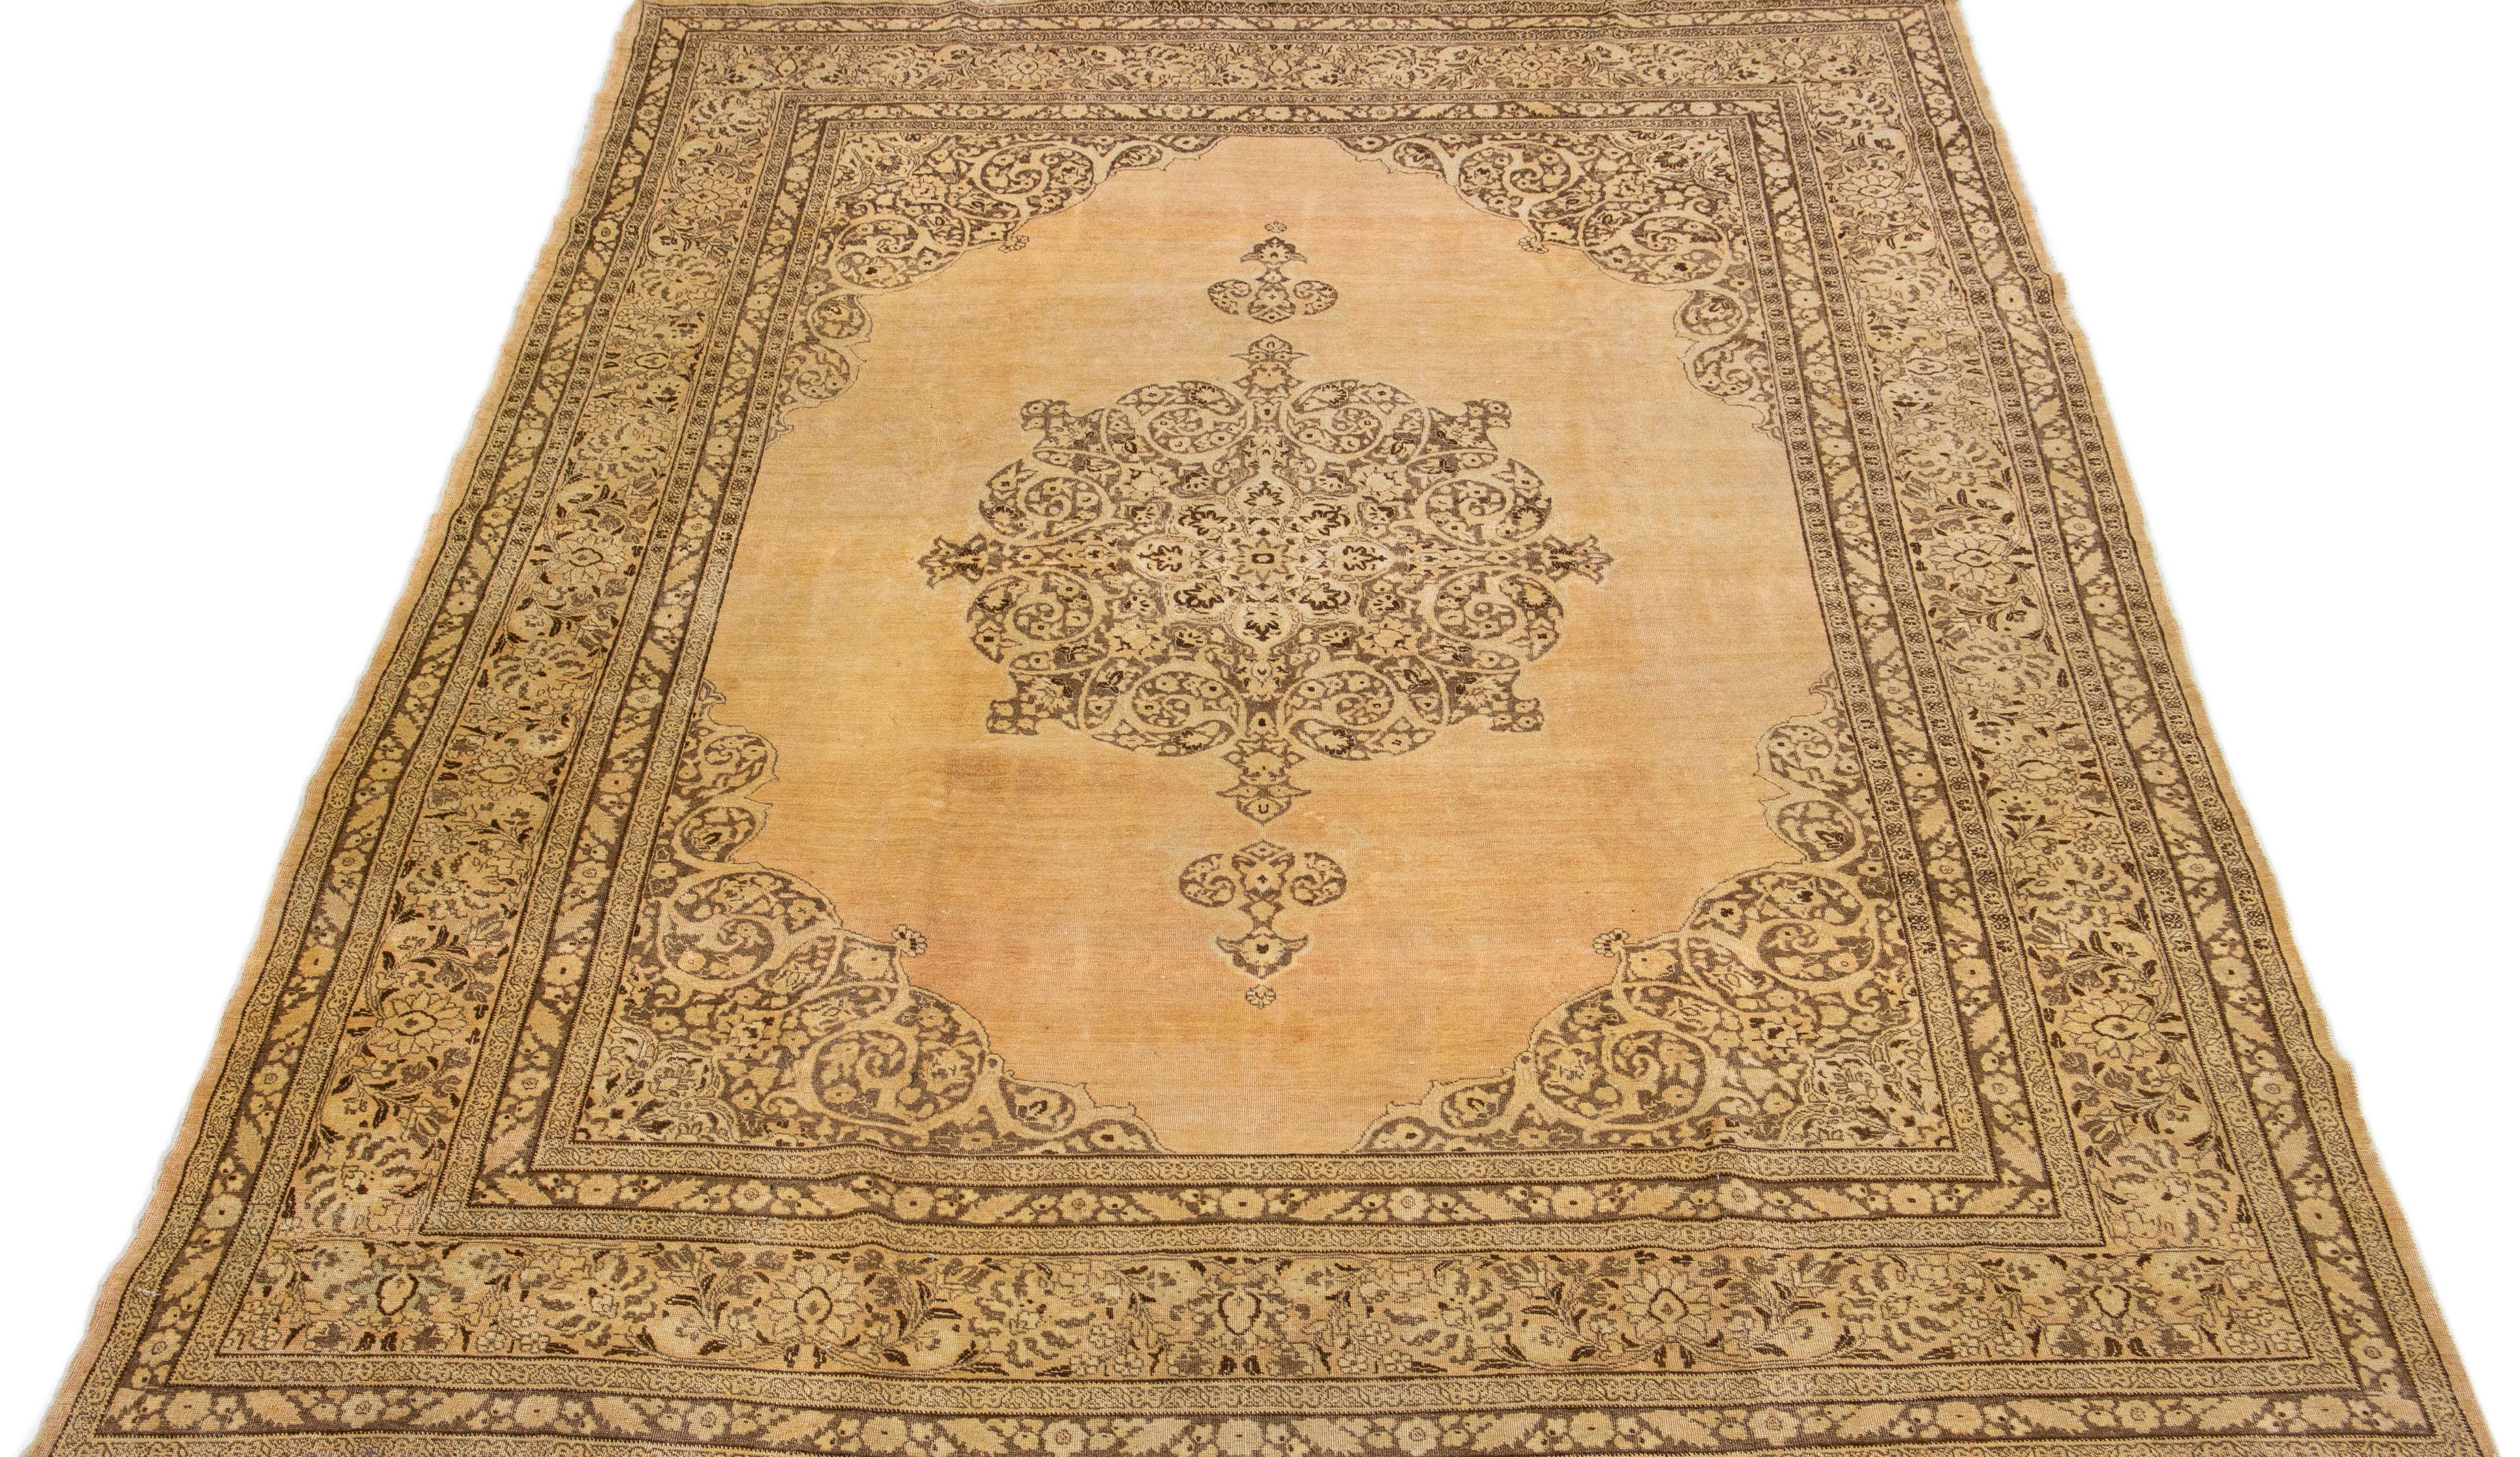 Beautiful antique Persian distressed hand-knotted wool rug with a beige-tan color field. This piece has gray, peach, and brown accents in a gorgeous all-over medallion floral design.

This rug measures: 9'1' x 12'3